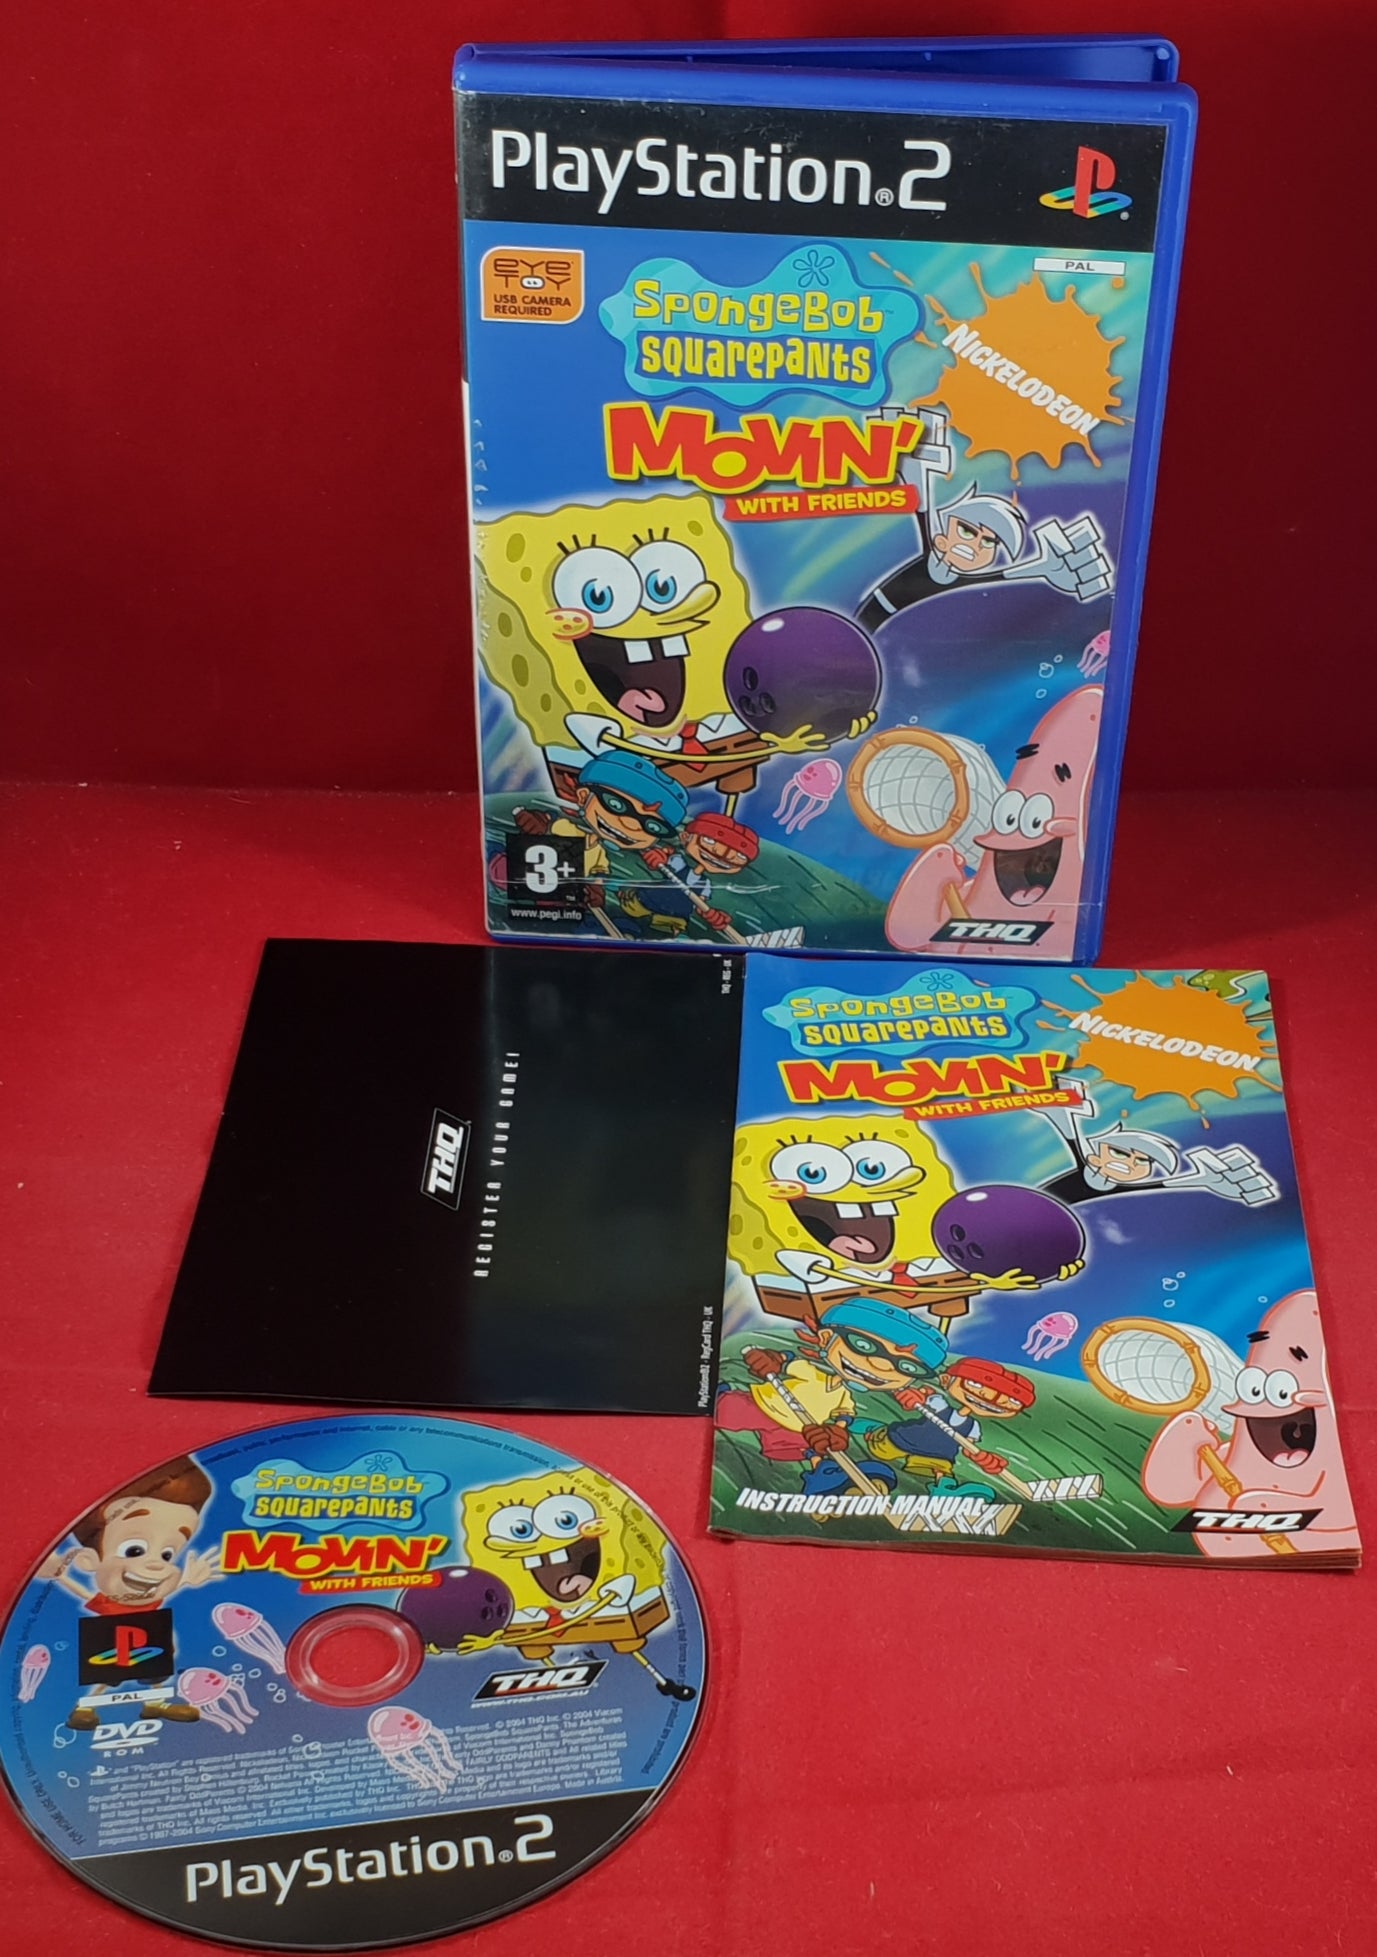 Spongebob Squarepants Movin' with Friends Sony Playstation 2 (PS2) Game